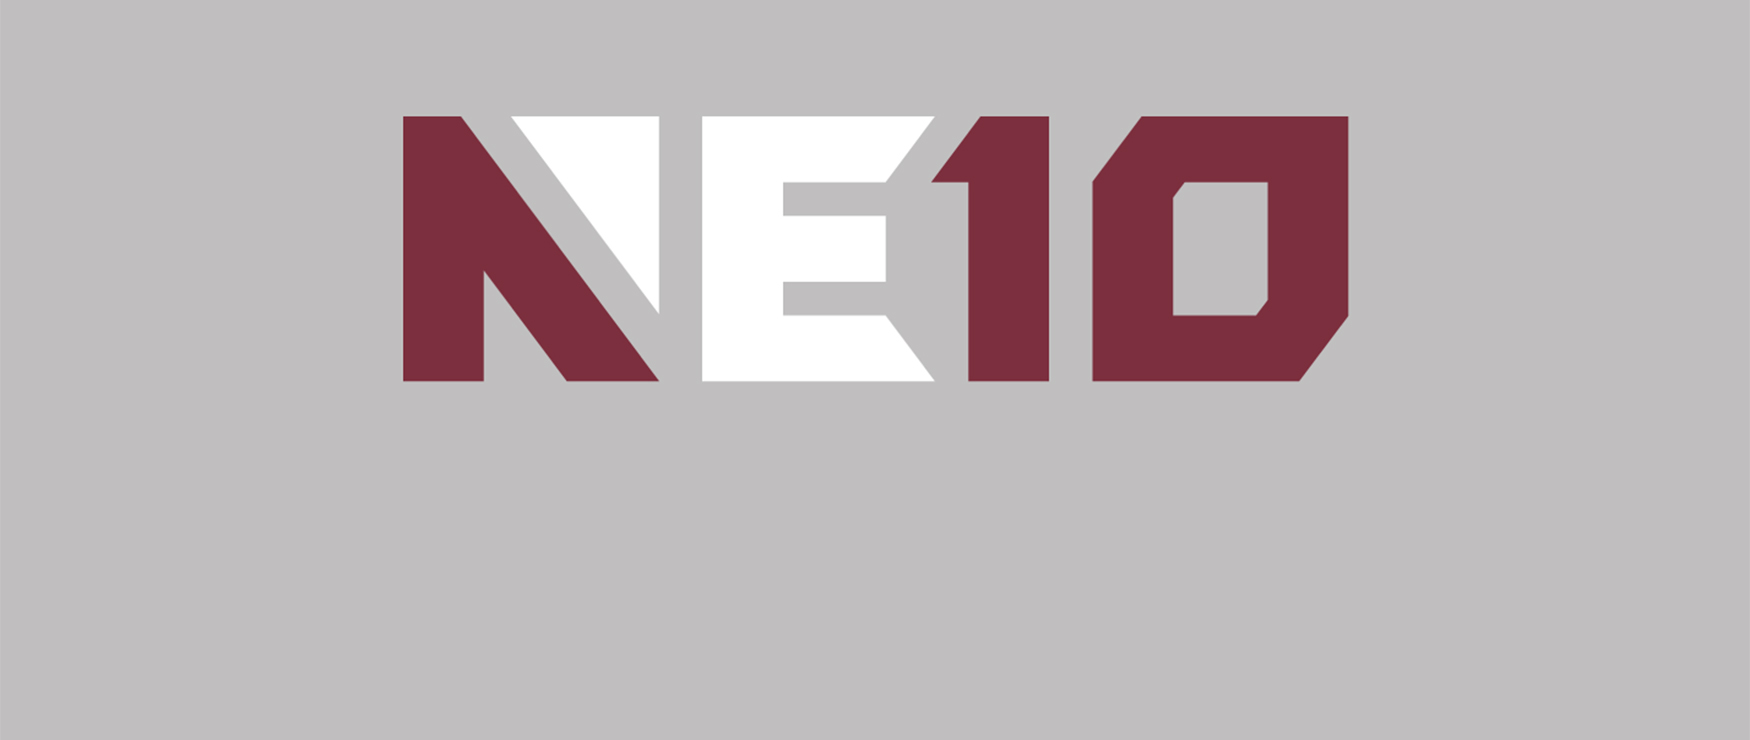 Northeast-10 Conference logo.